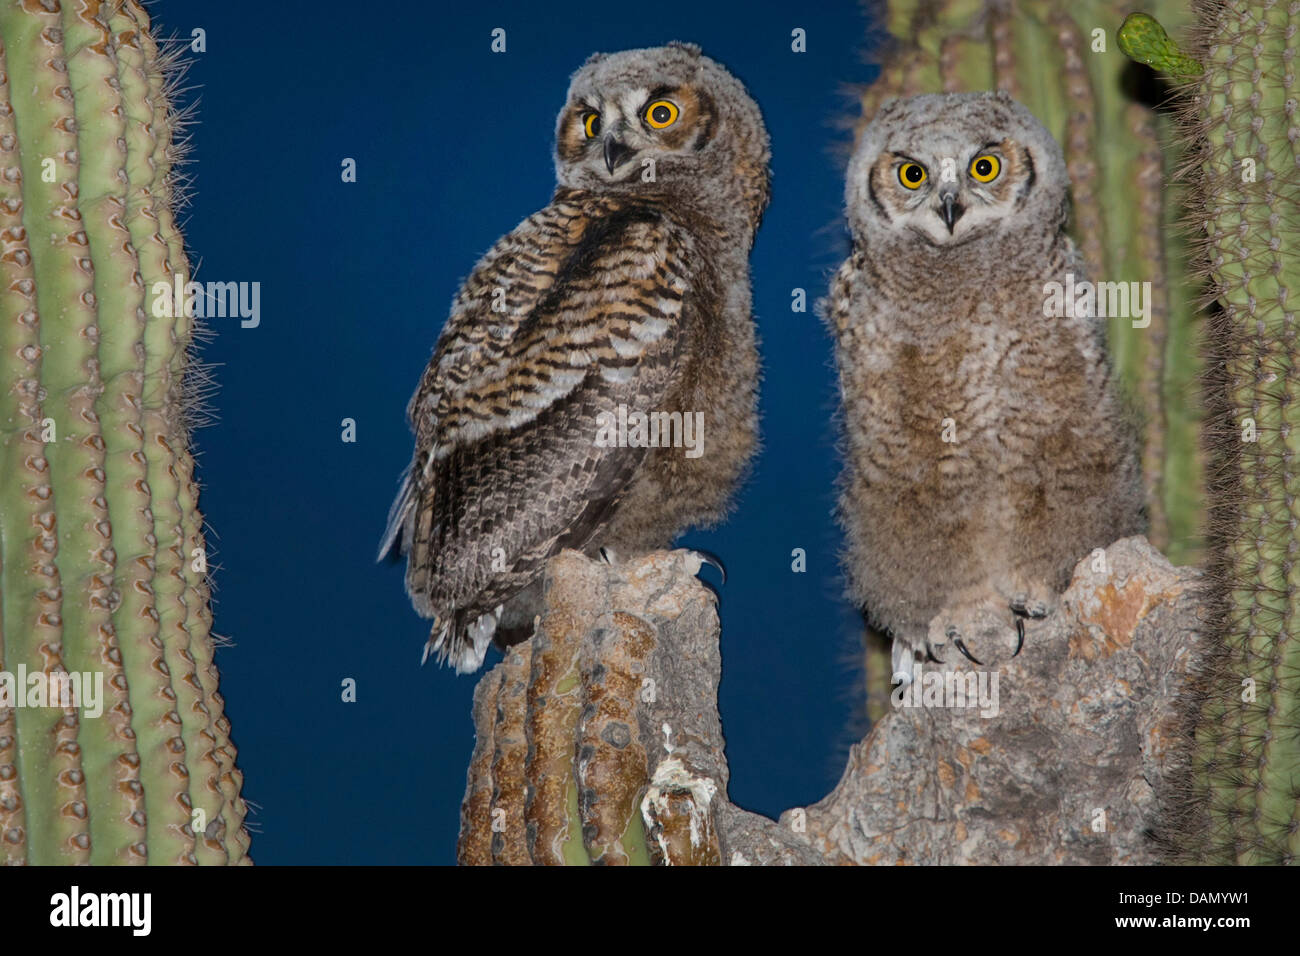 great horned owl (Bubo virginianus), two young owls sitting together in the nest in a Saguaro, USA, Arizona, Phoenix Stock Photo